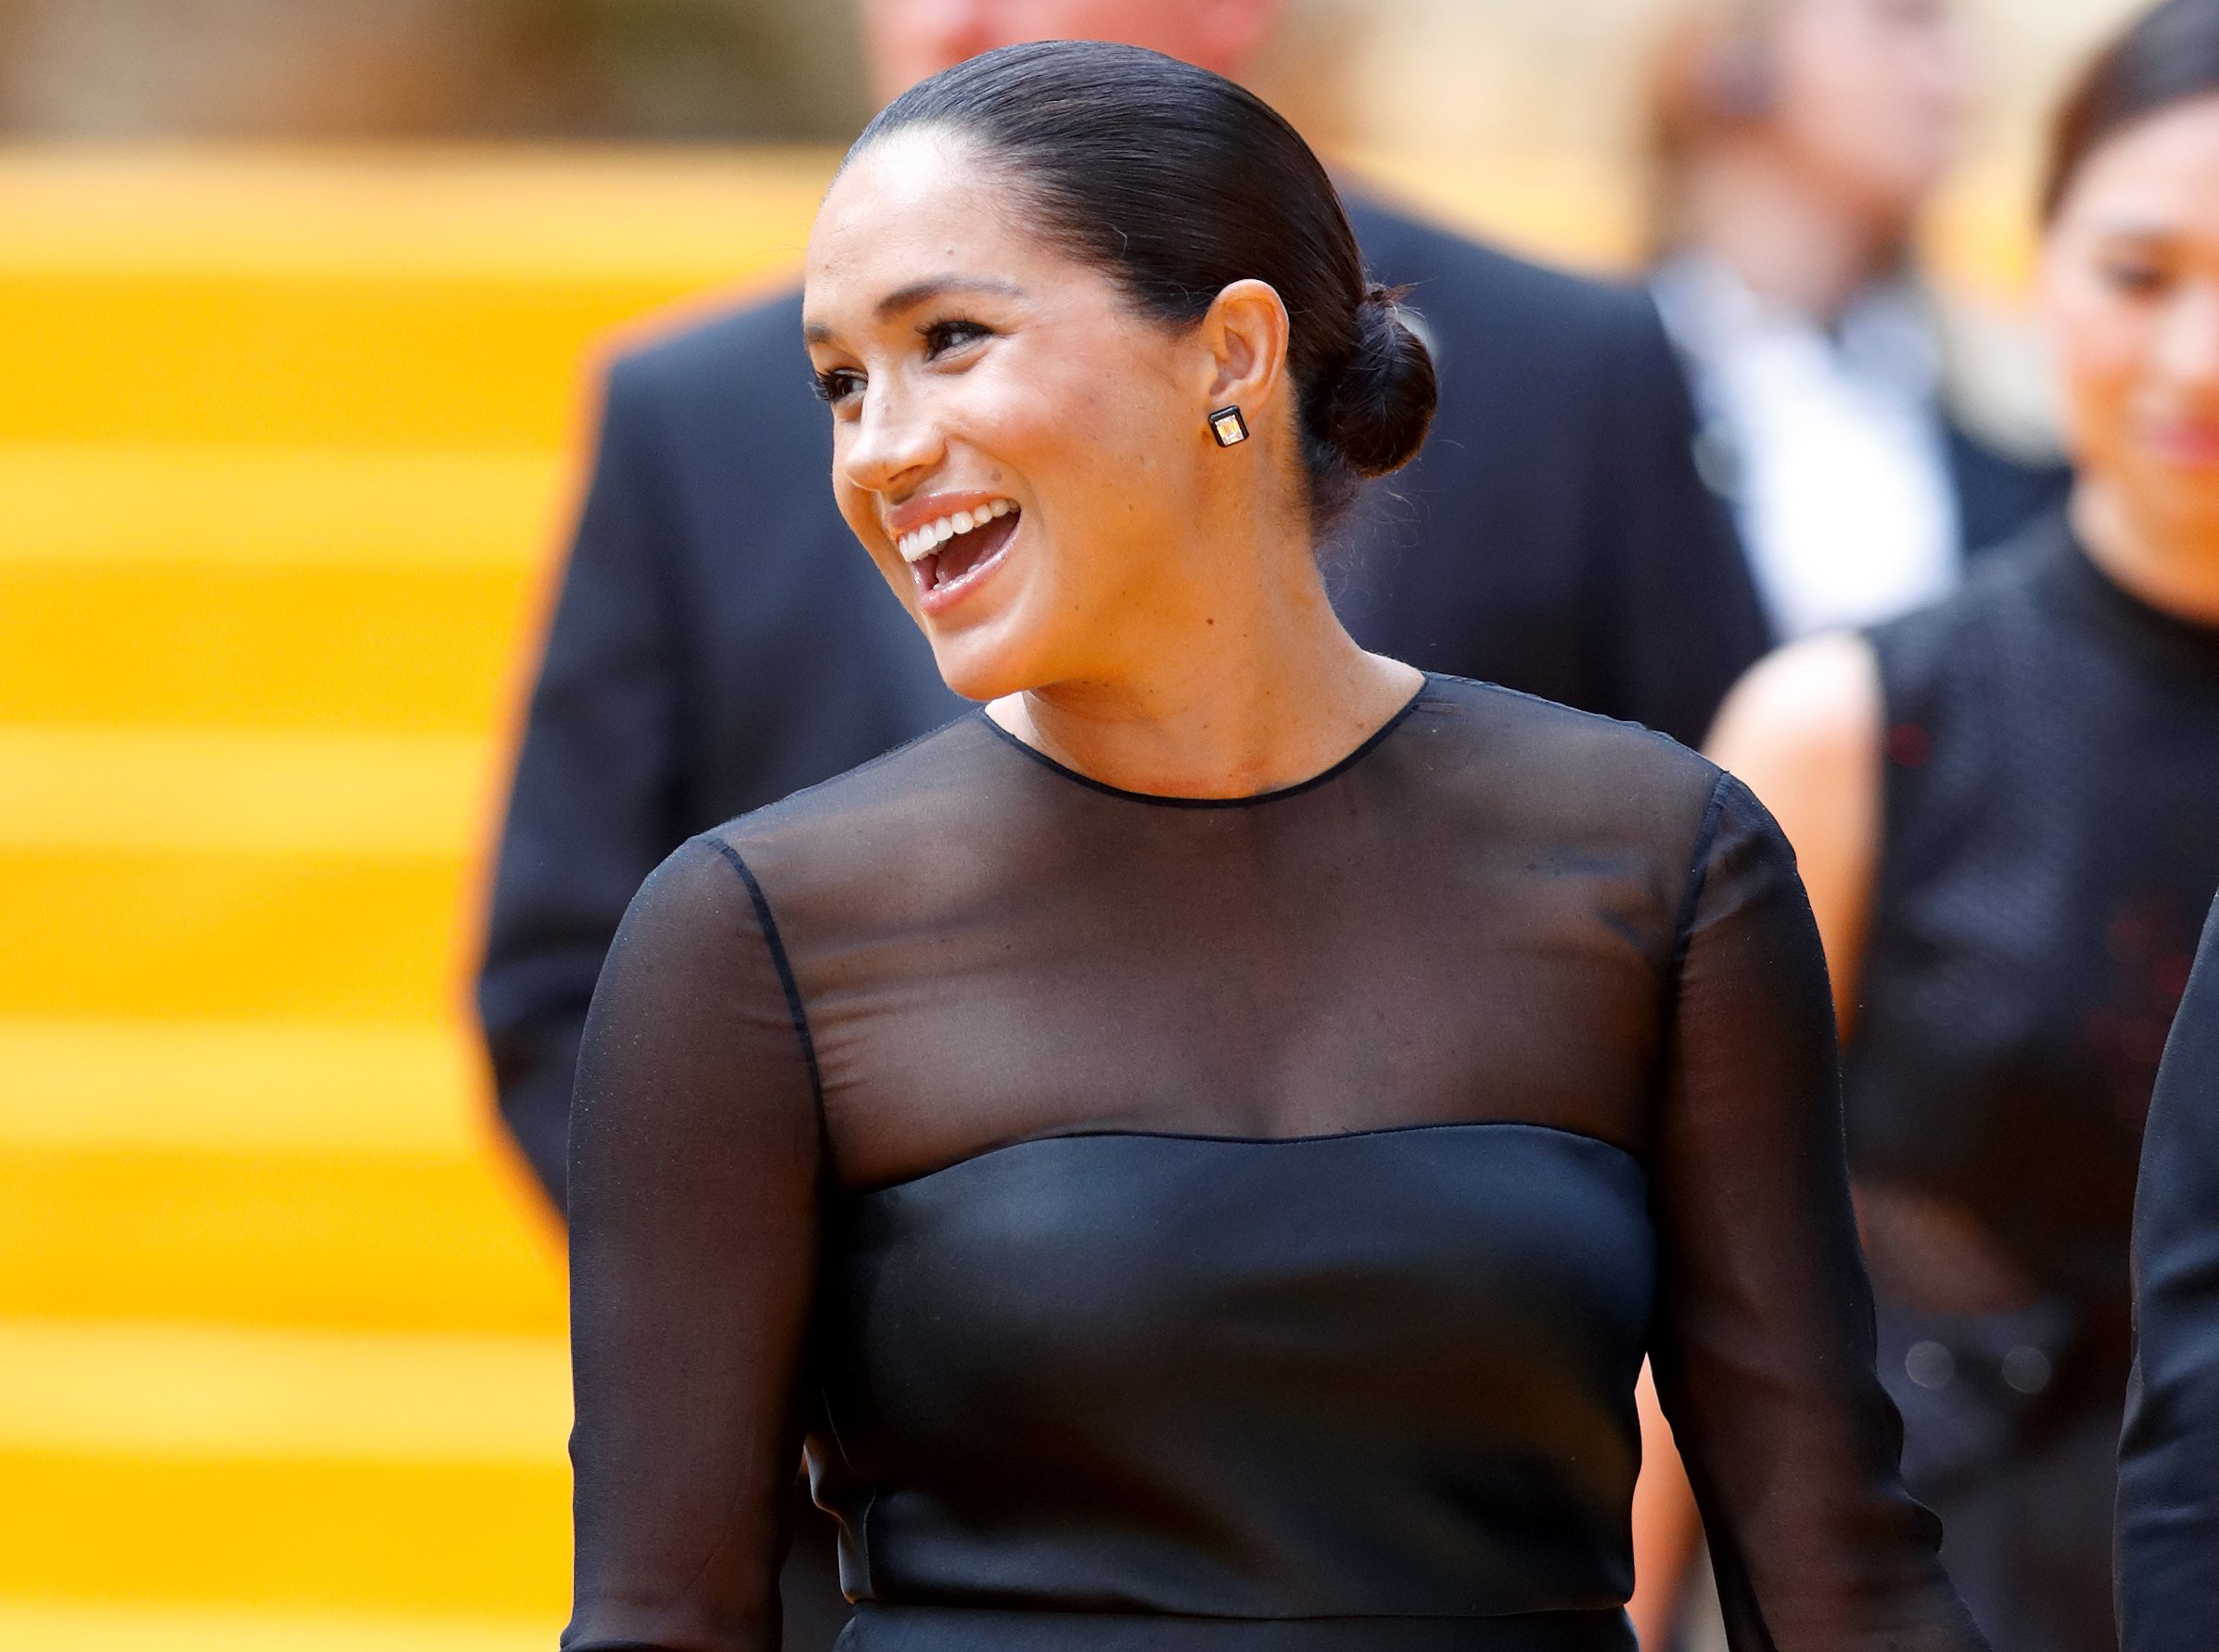 Meghan Markle attends "The Lion King" premiere in London on Sunday, July 14, 2019 | Photo: Getty Images